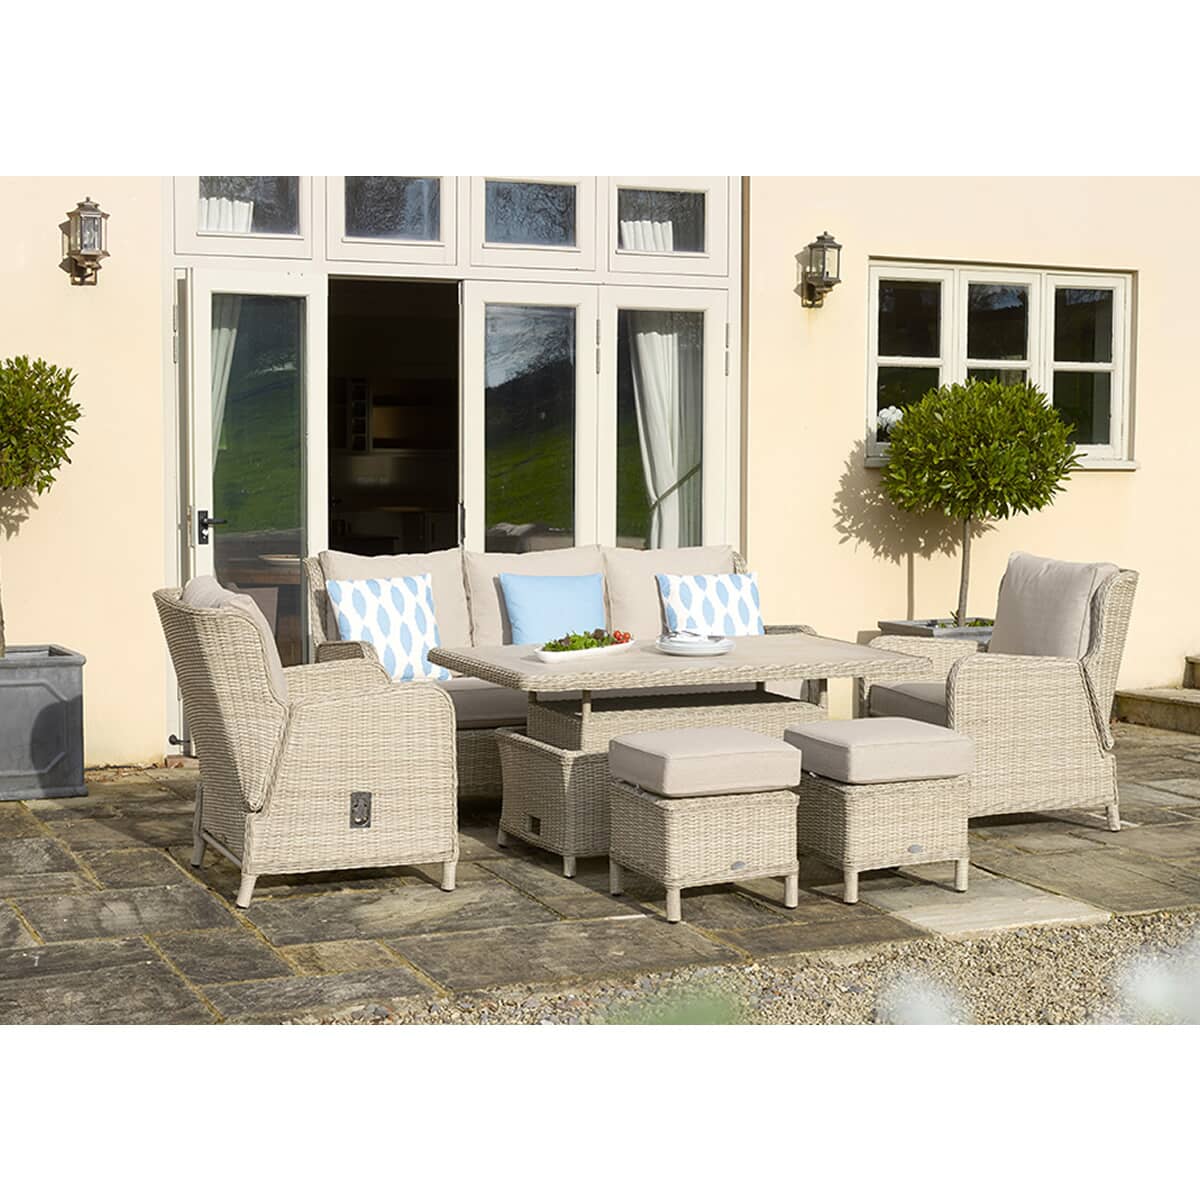 Bramblecrest Chedworth Reclining 3 Seat Sofa Dual Height Rectangle Table - Sandstone